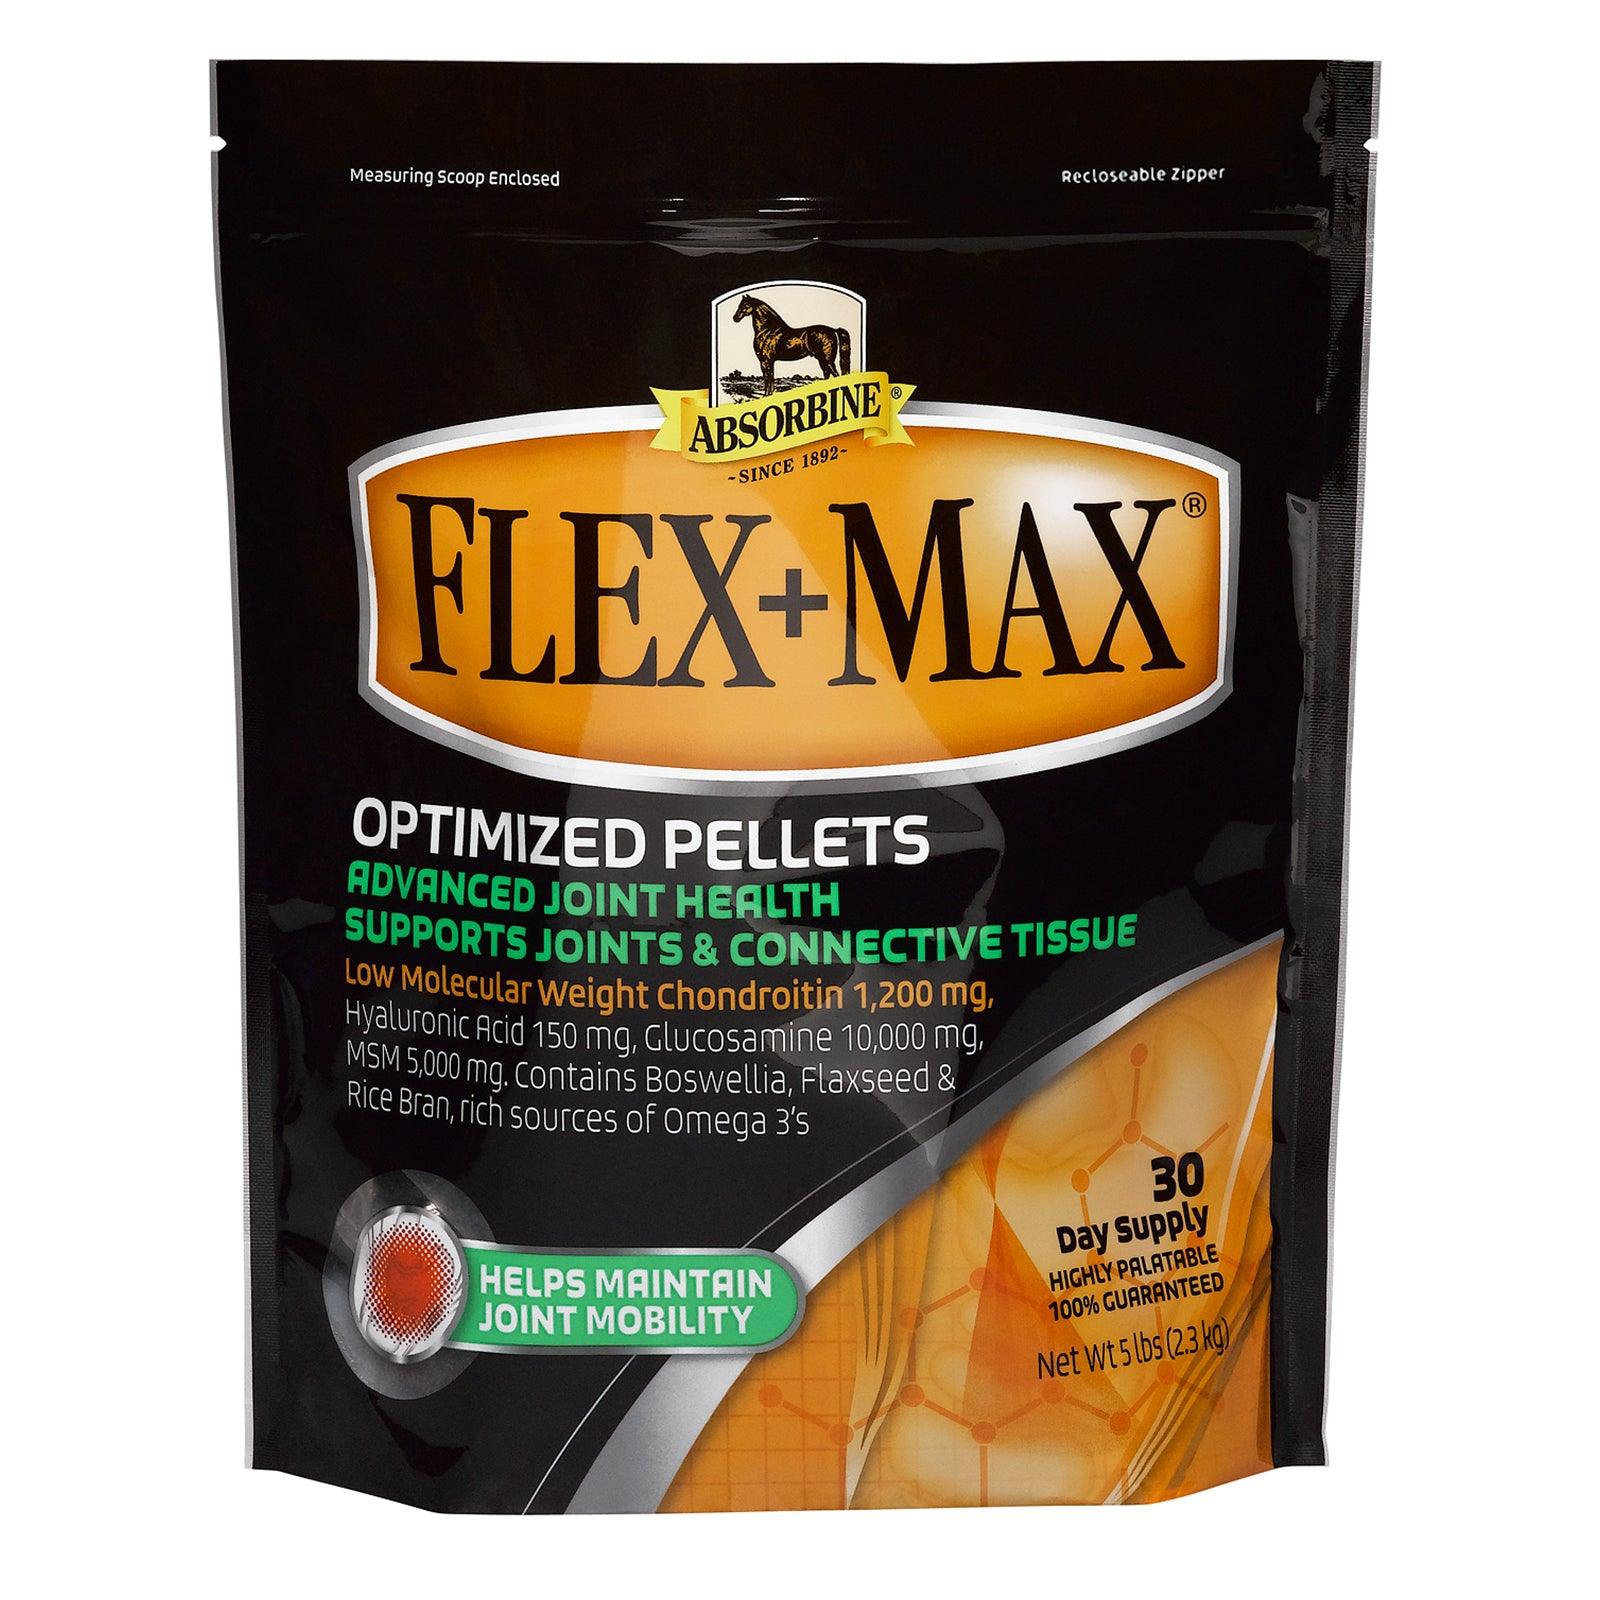 Absorbine Flex + Max optimized pellets for advanced joint health.  Supports joints & connectivity tissue 30 day supply 5 lb. bag.